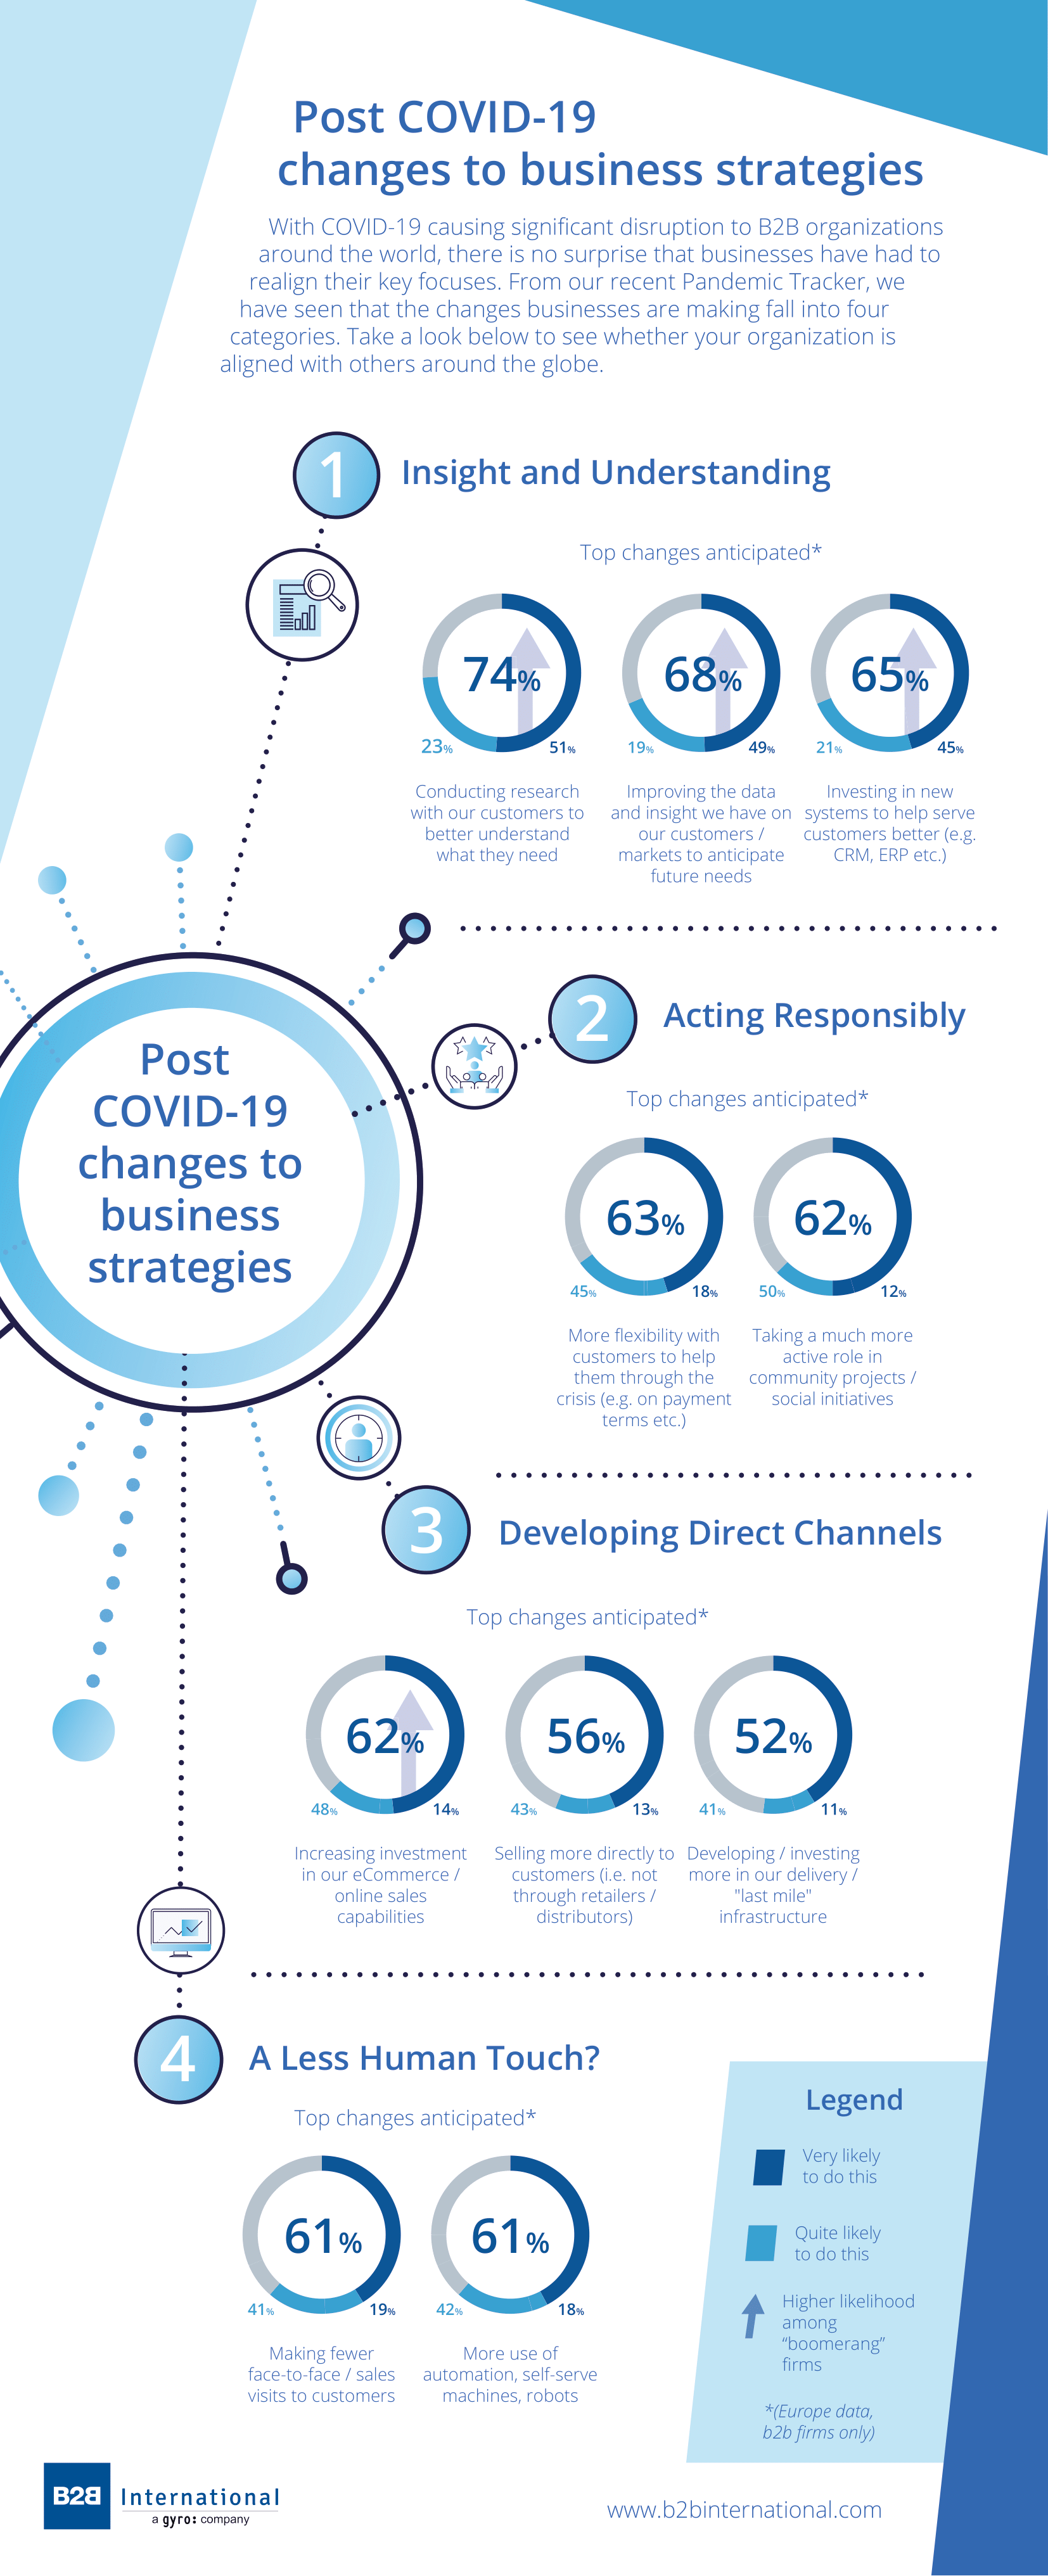 Post COVID-19 Changes to Business Strategies